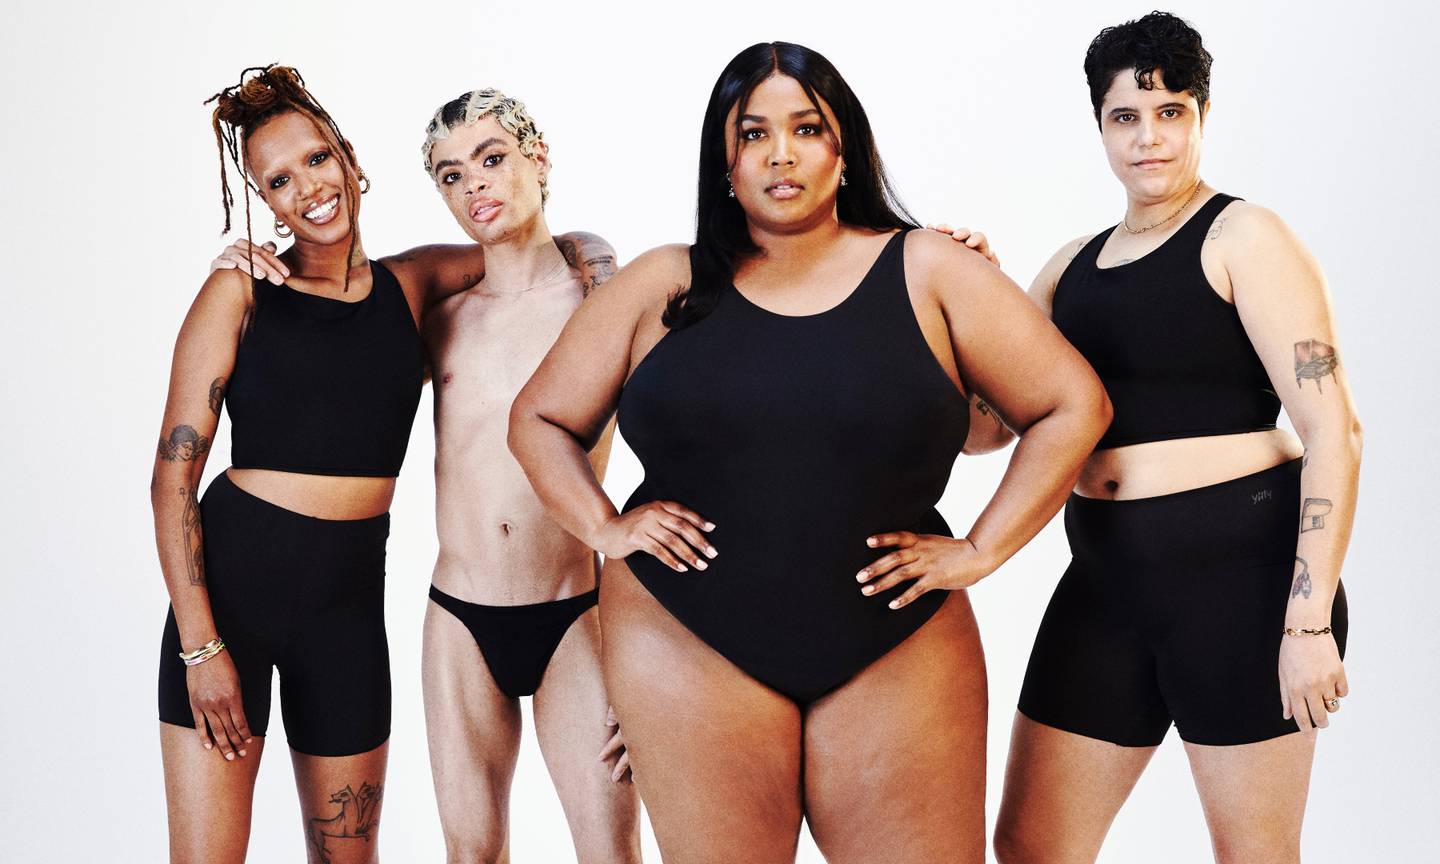 Lizzo poses with models for forthcoming campaign.